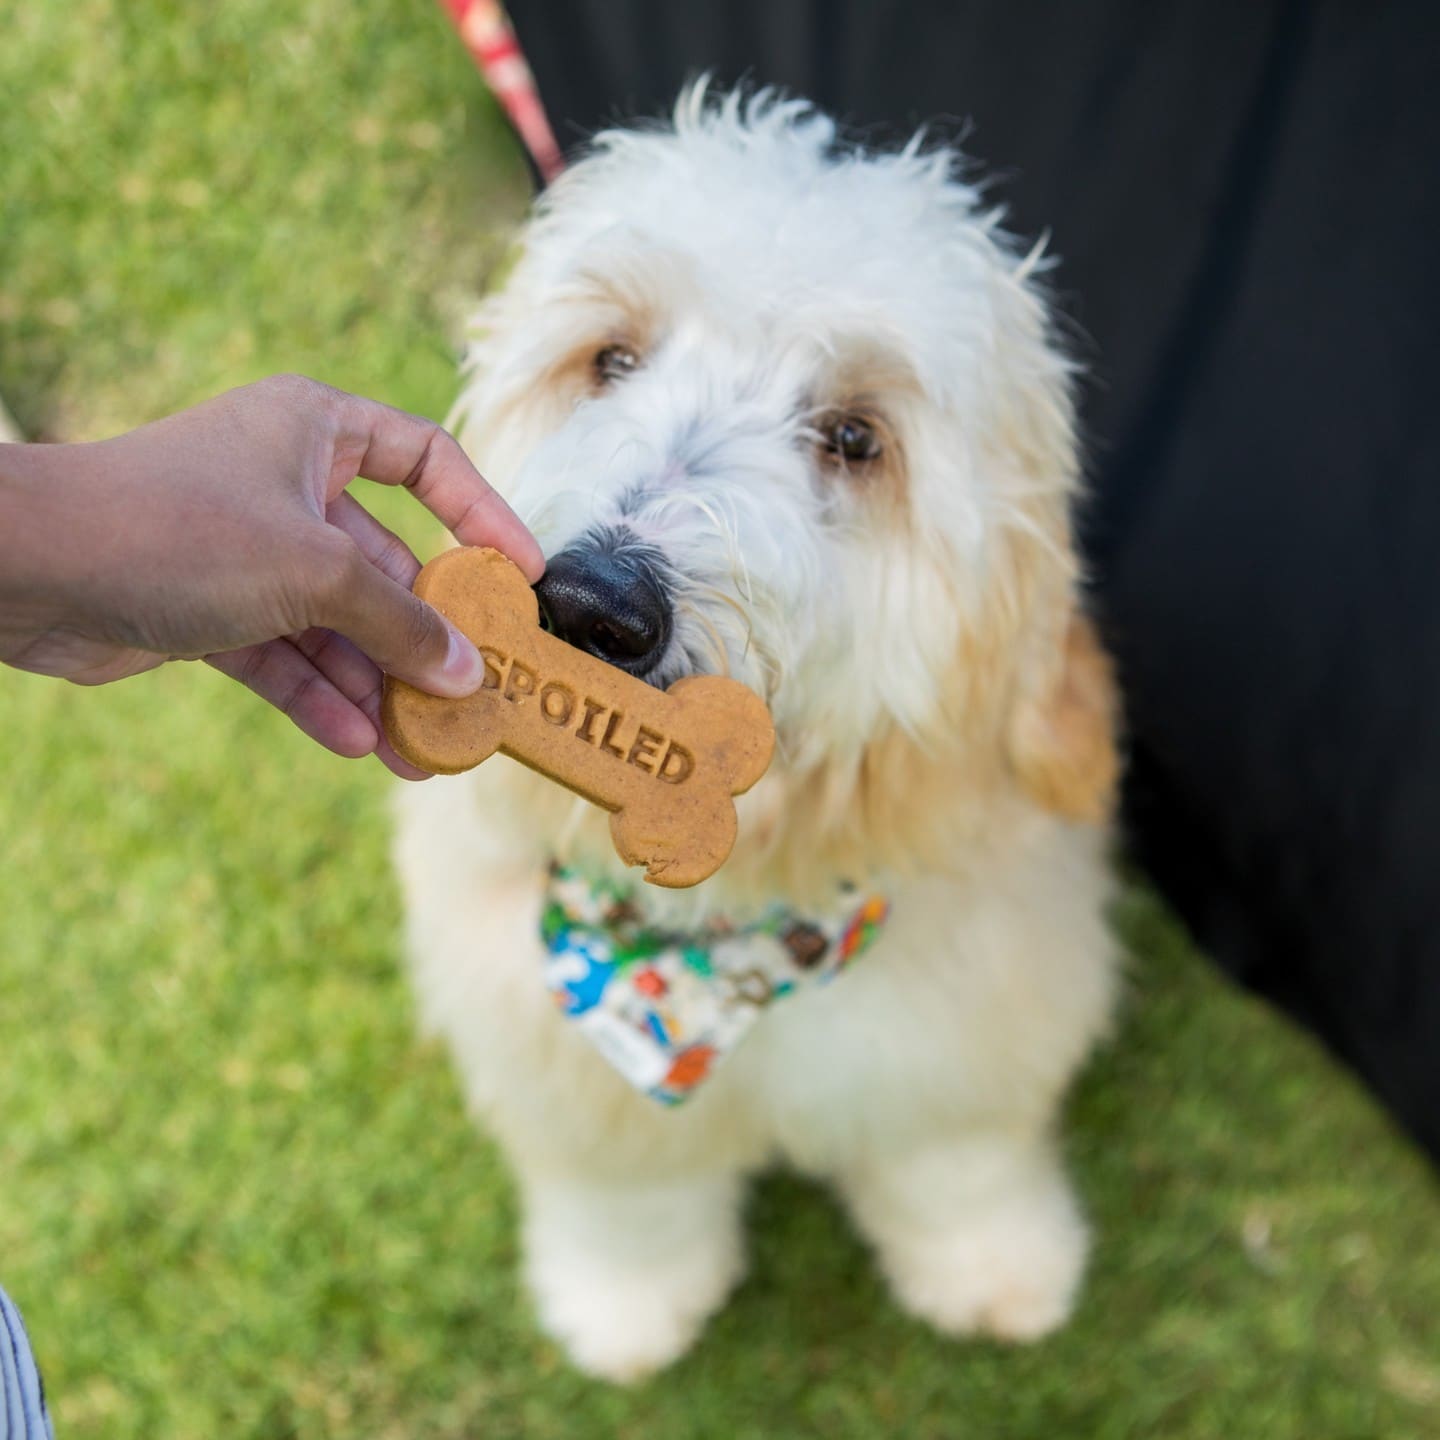 Calling all animal lovers! Bring your family and furry friends to South Shore Market this Saturday and Sunday from 10am to 3pm for the Aloha Pet & Family Fair. The weekend will be full of pet-themed activities, shopping, giveaways, and more! Click our link in bio for more details.